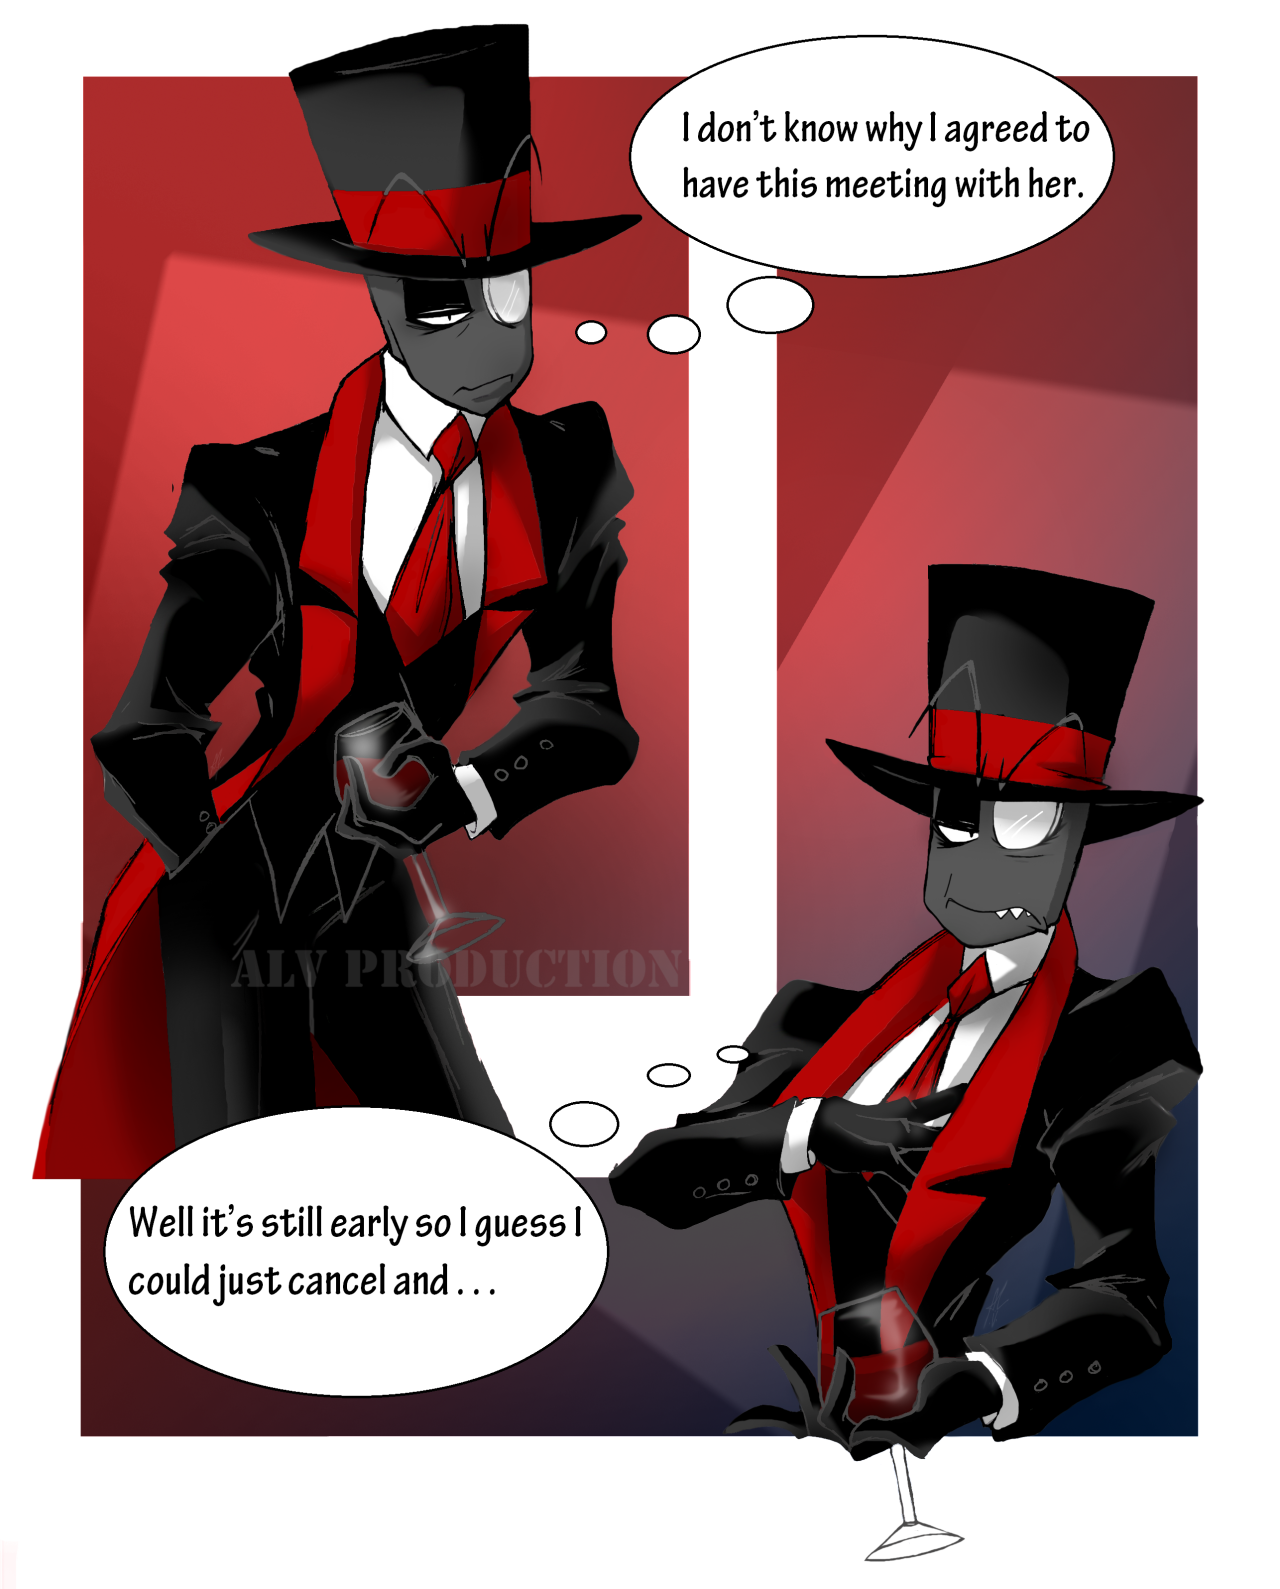 whitefox89 — Does Black Hat ever heard Rose sing?